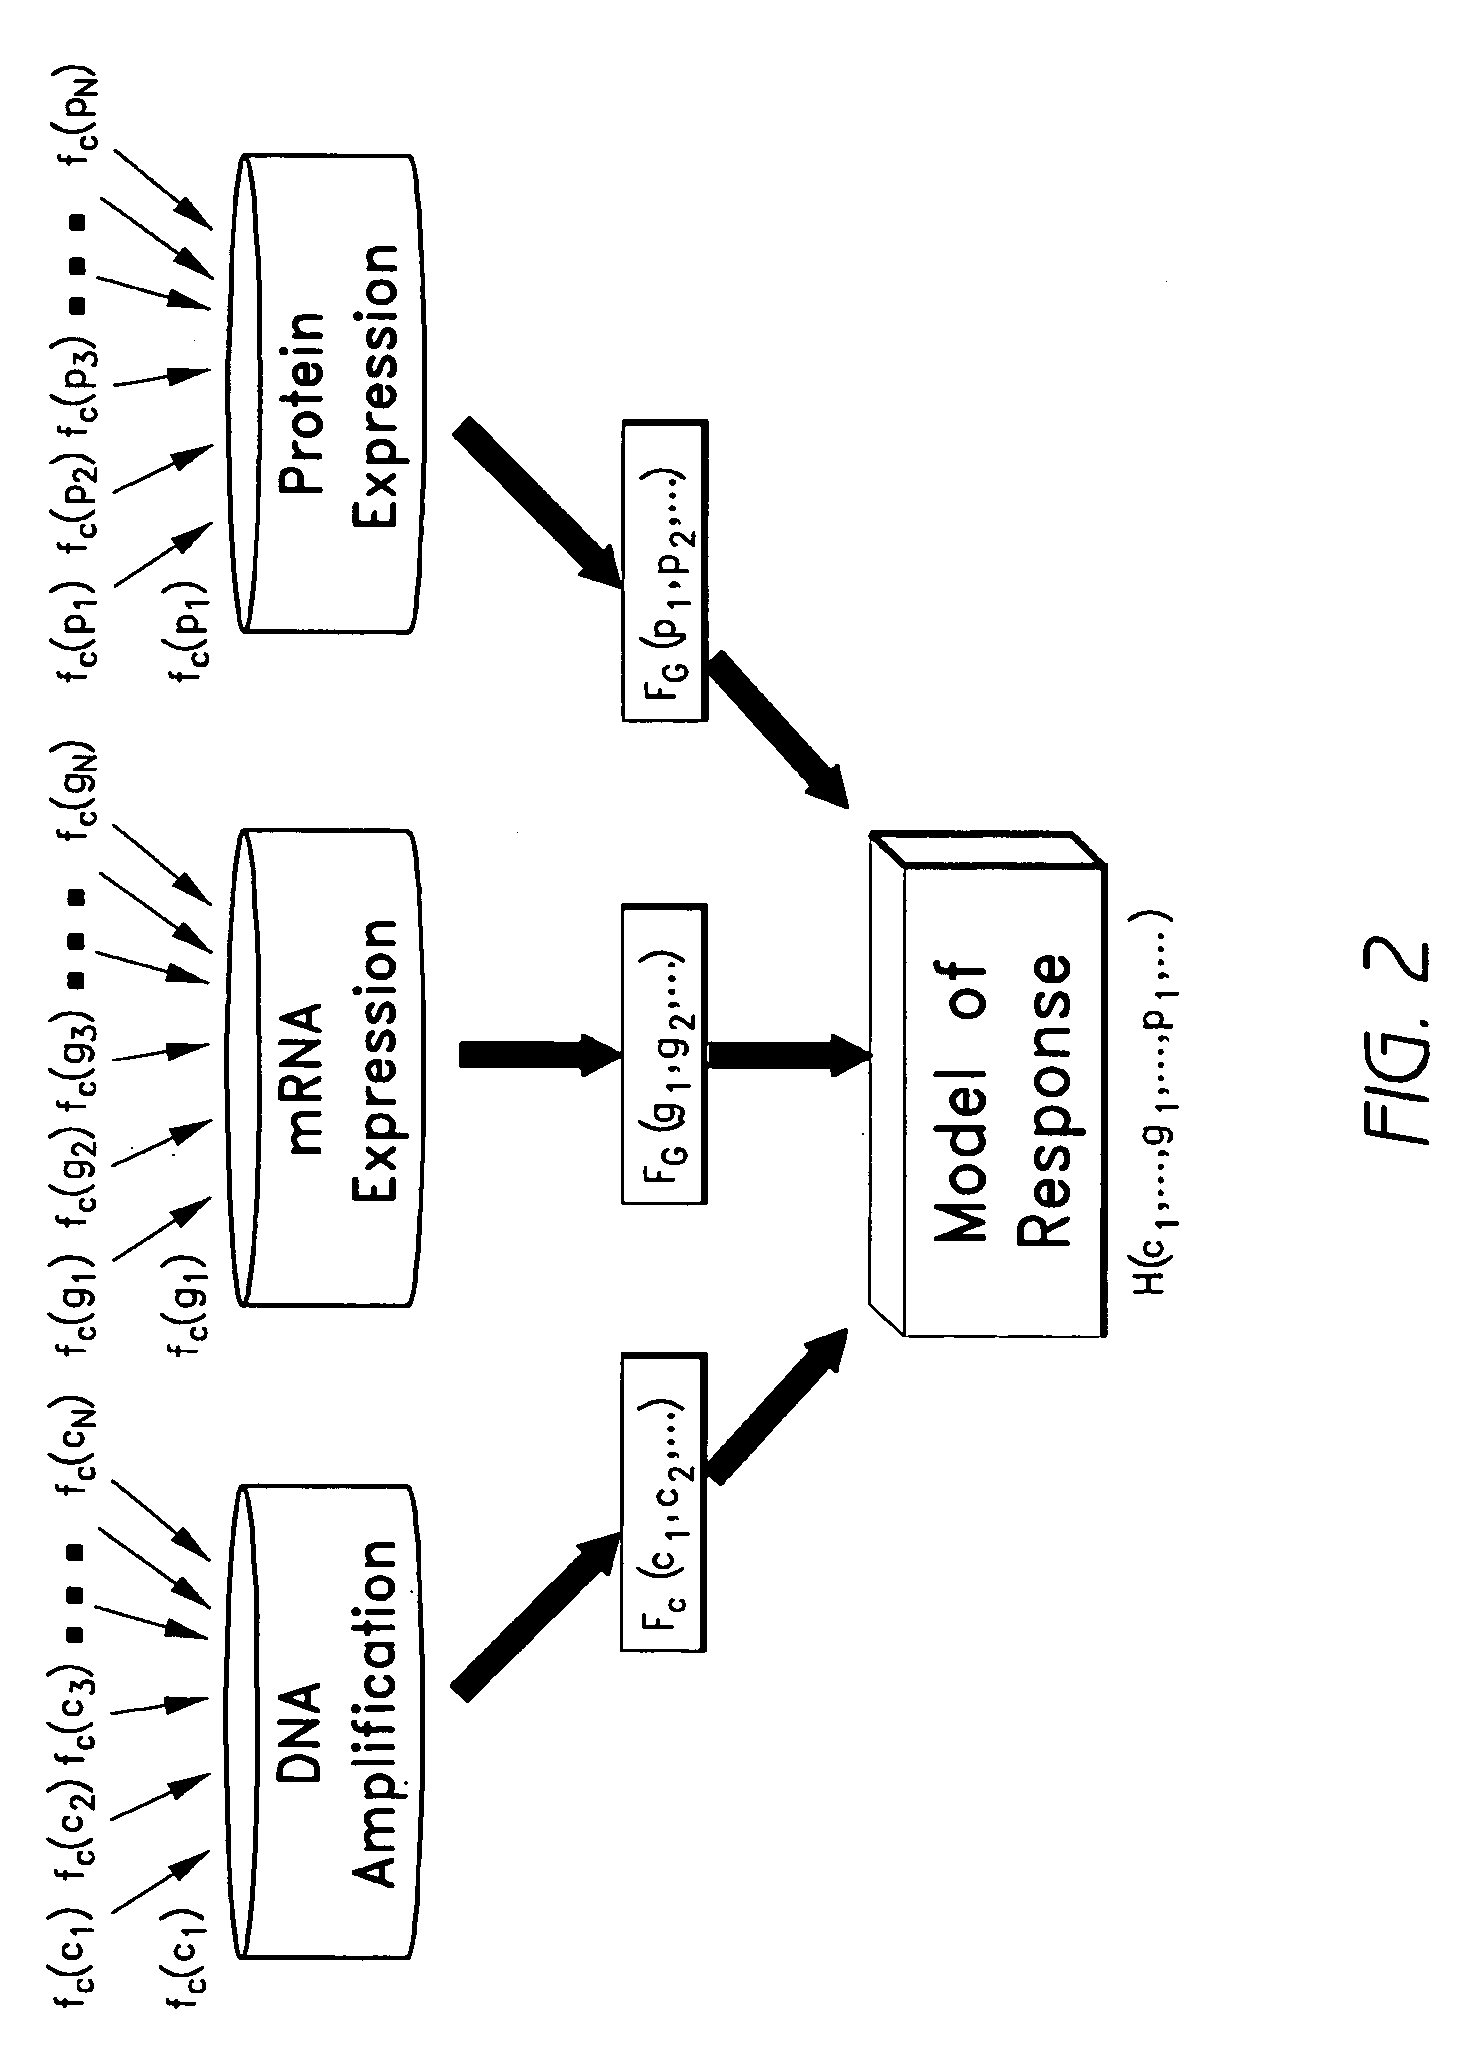 Systems and methods for predicting response of biological samples